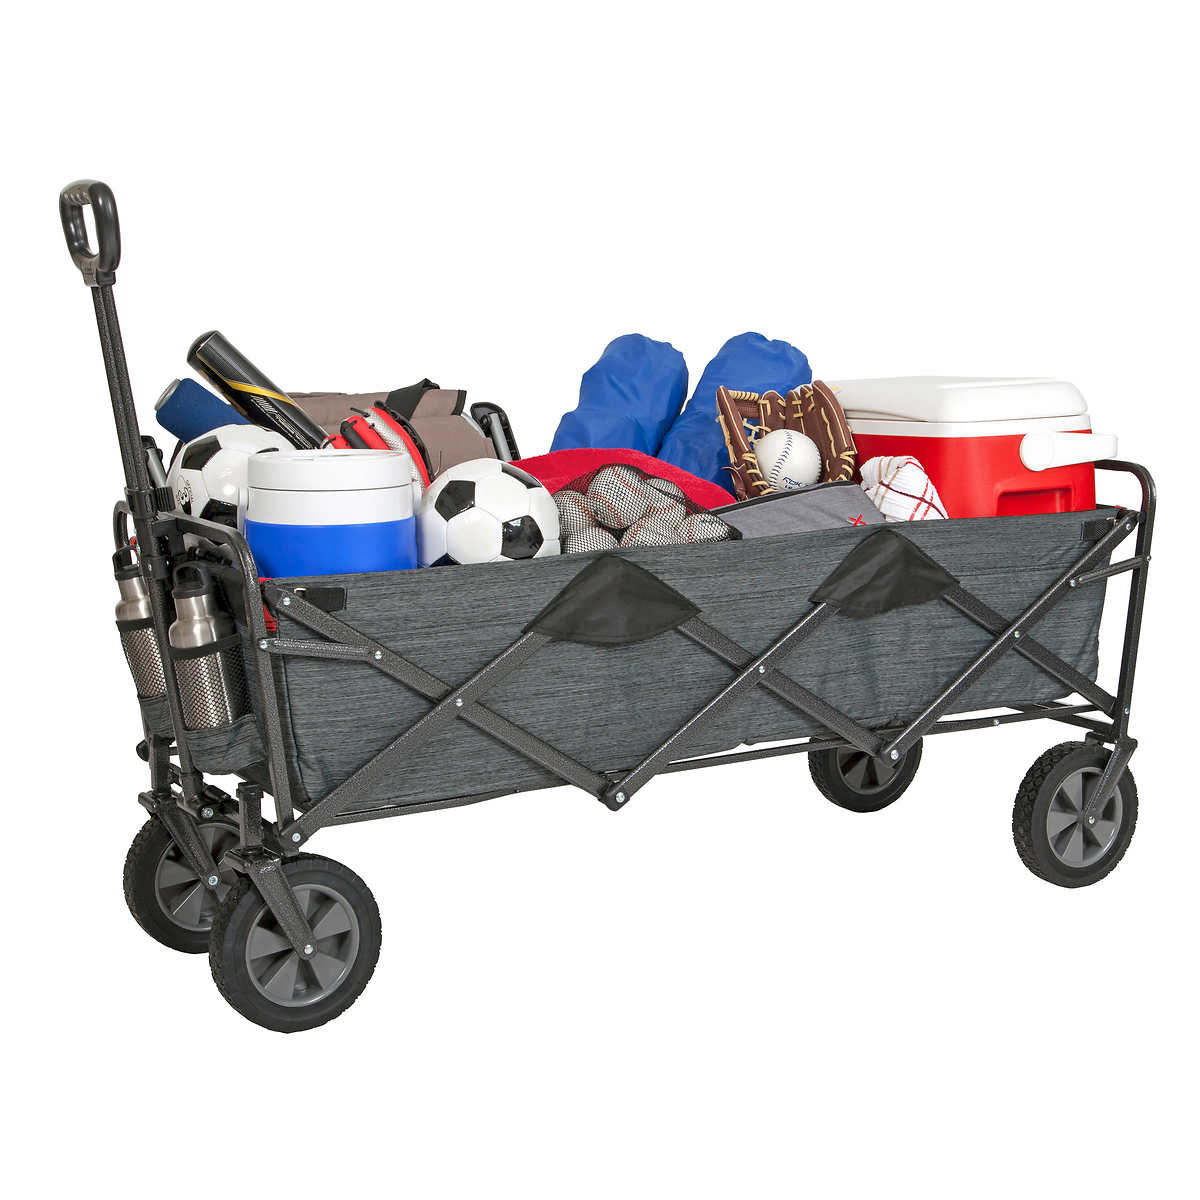 Heavy Duty Collapsible Fold Utility Wagon Quad Compact Outdoor Garden Camp Cart 